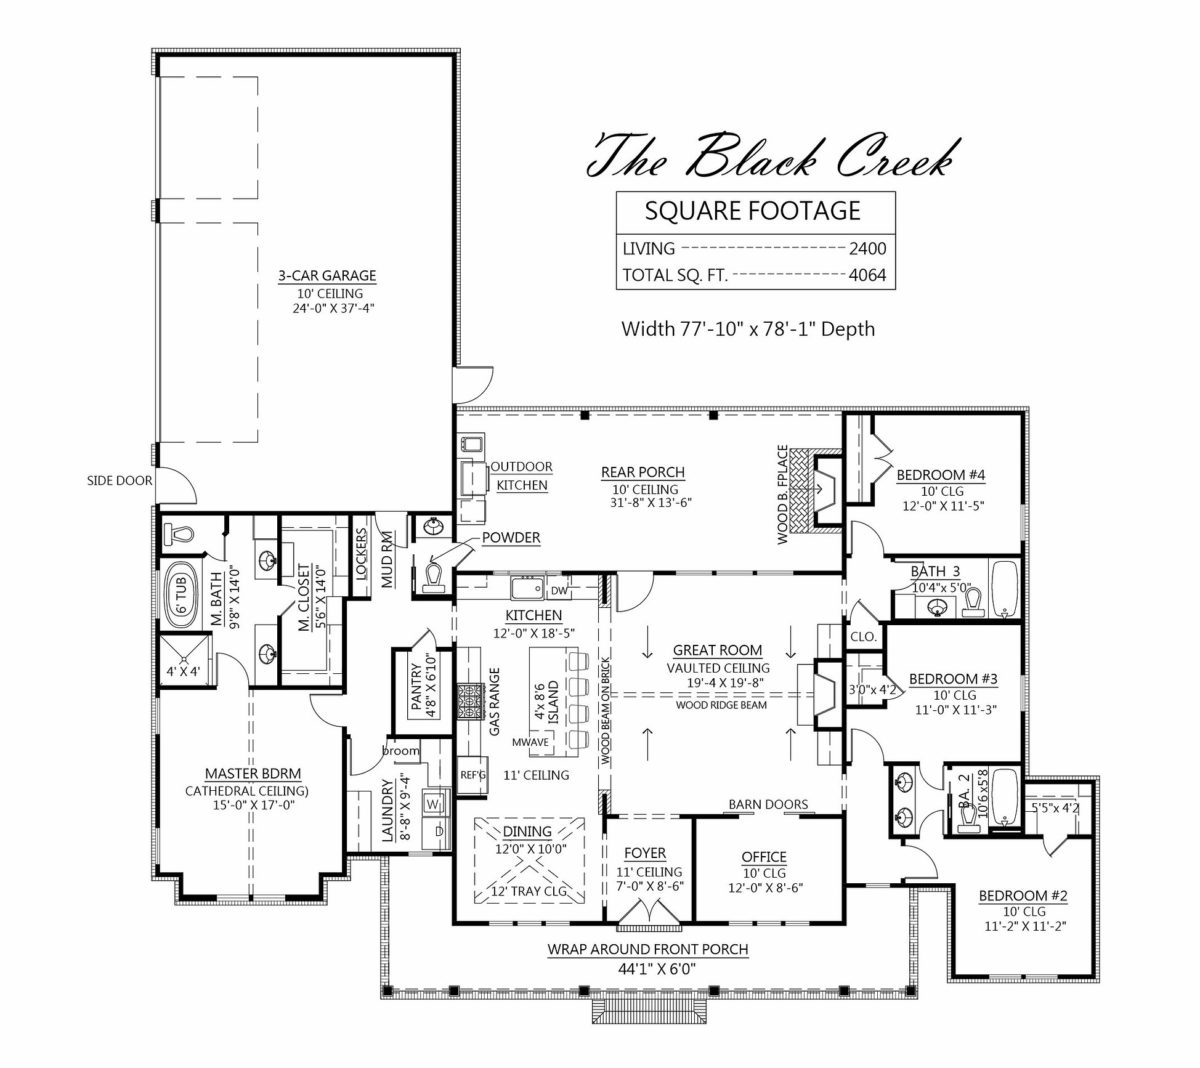 Fulfill your family's needs with The Black Creek homedesign.